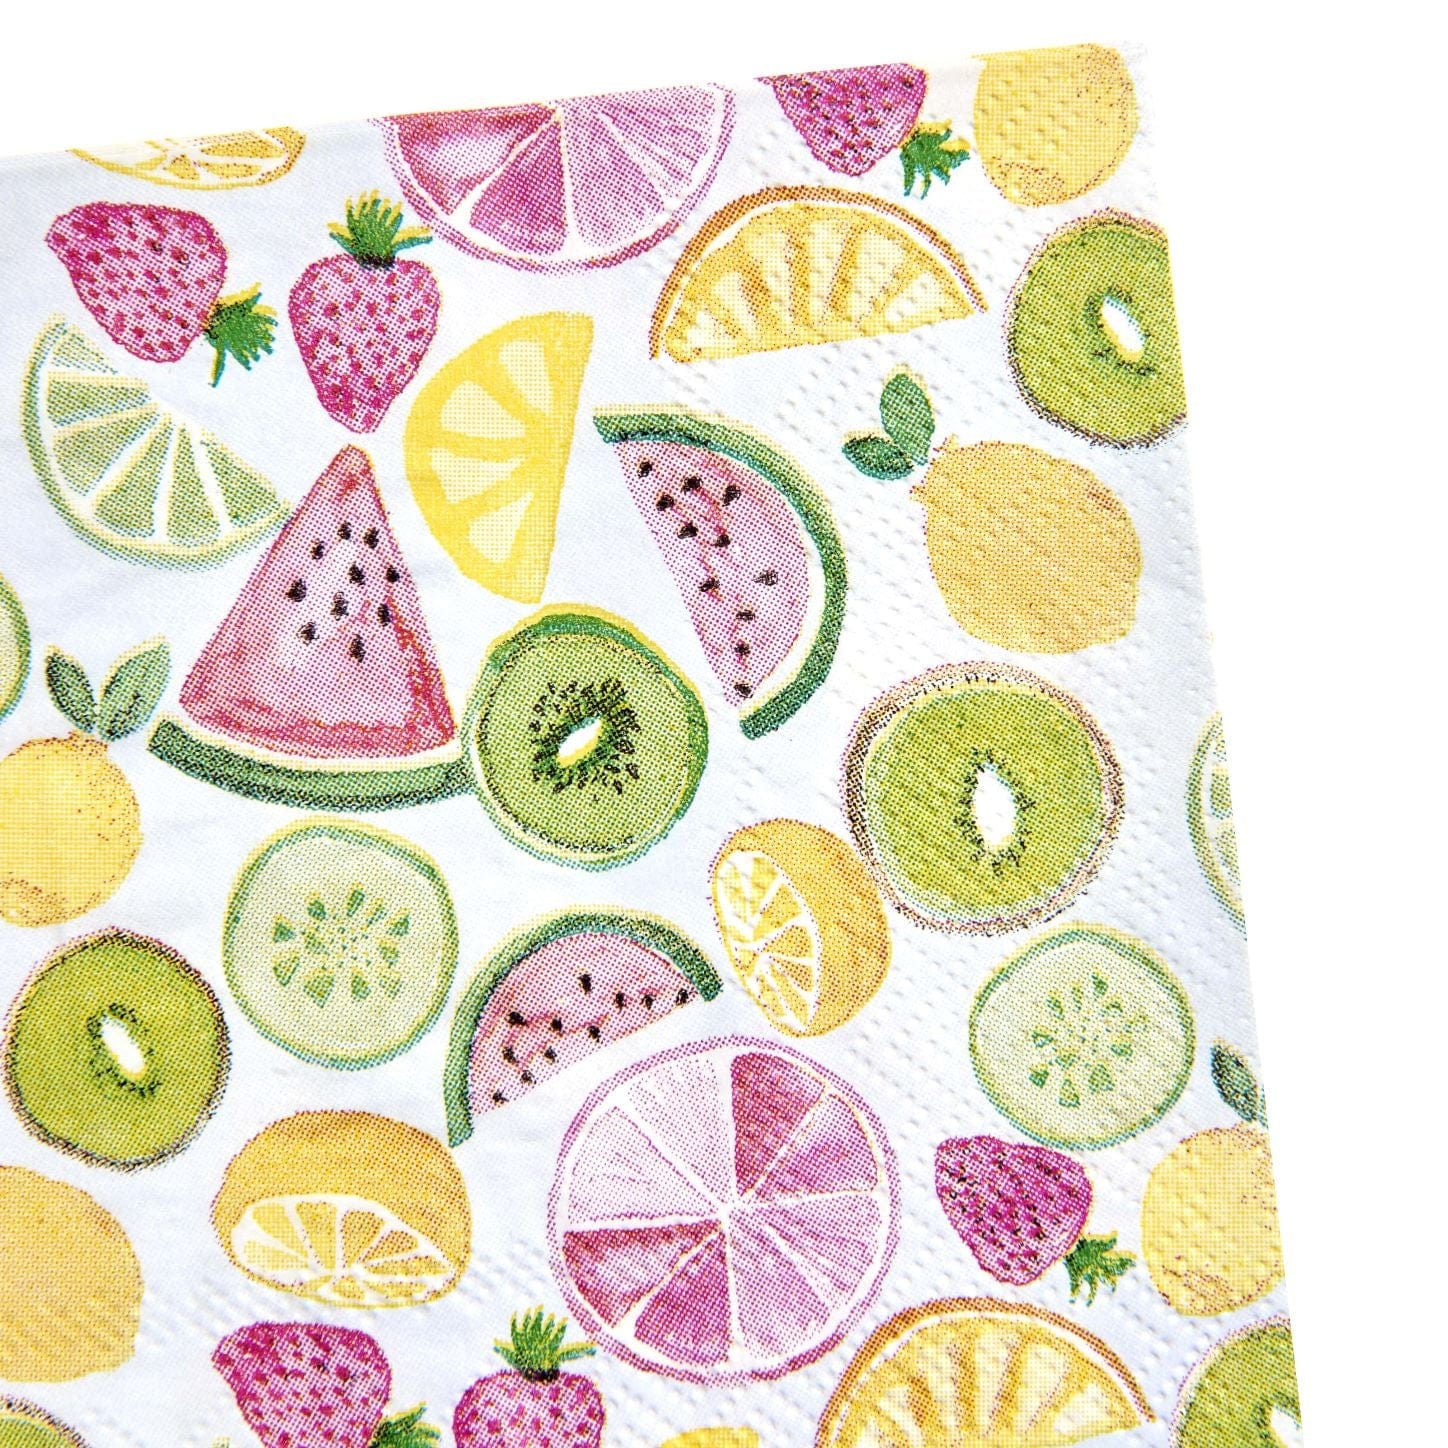 Fruit Cocktail Napkins - 40 Count Roobee Napkins 94763